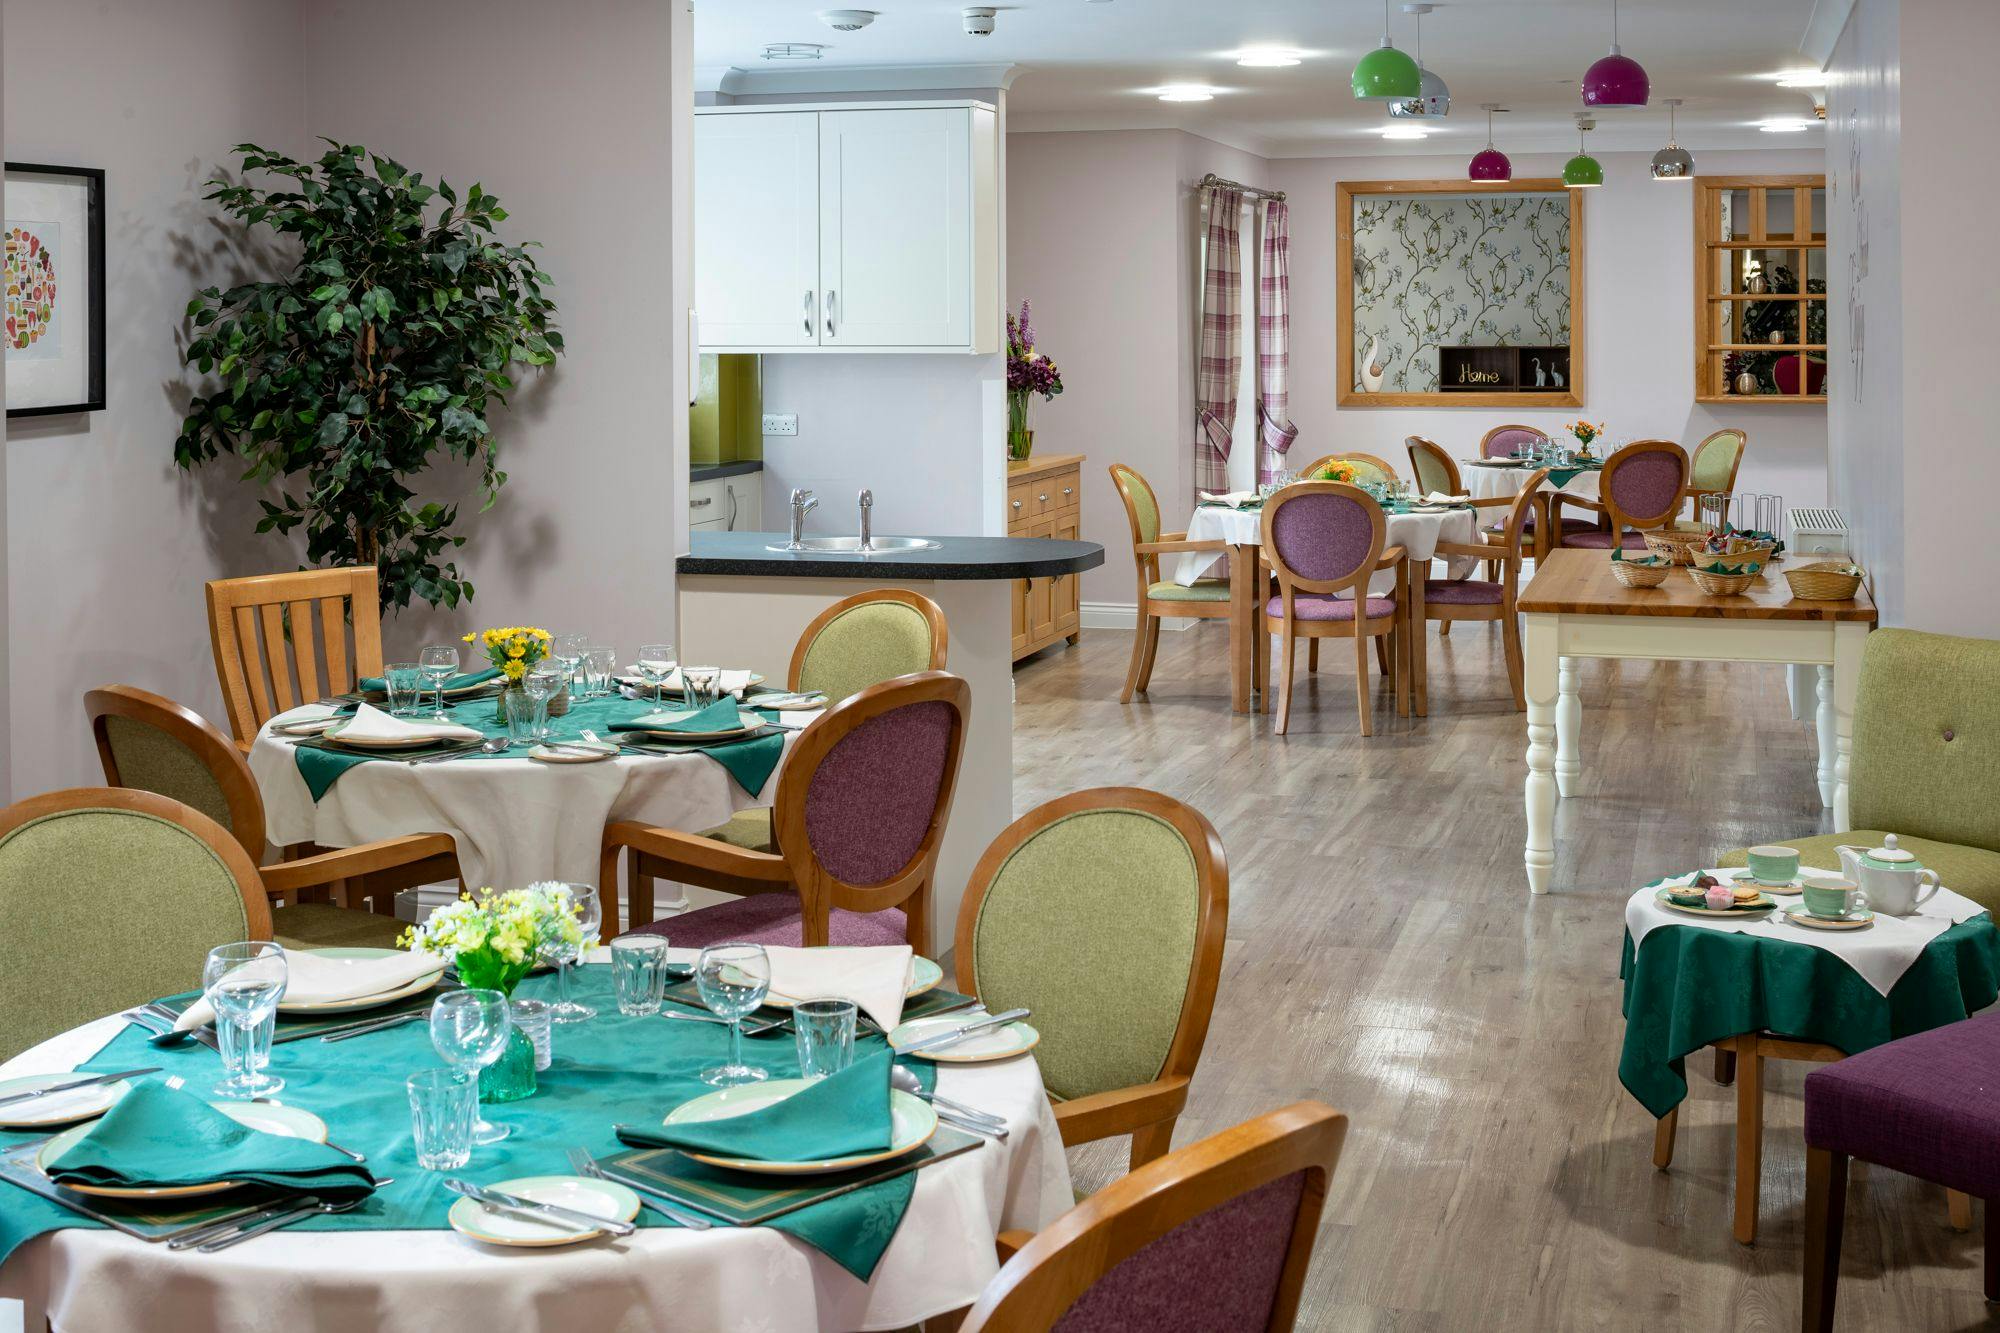 Dining area at Edwardstow Court Care Home in Stow-on-the-Wold, Cotswold